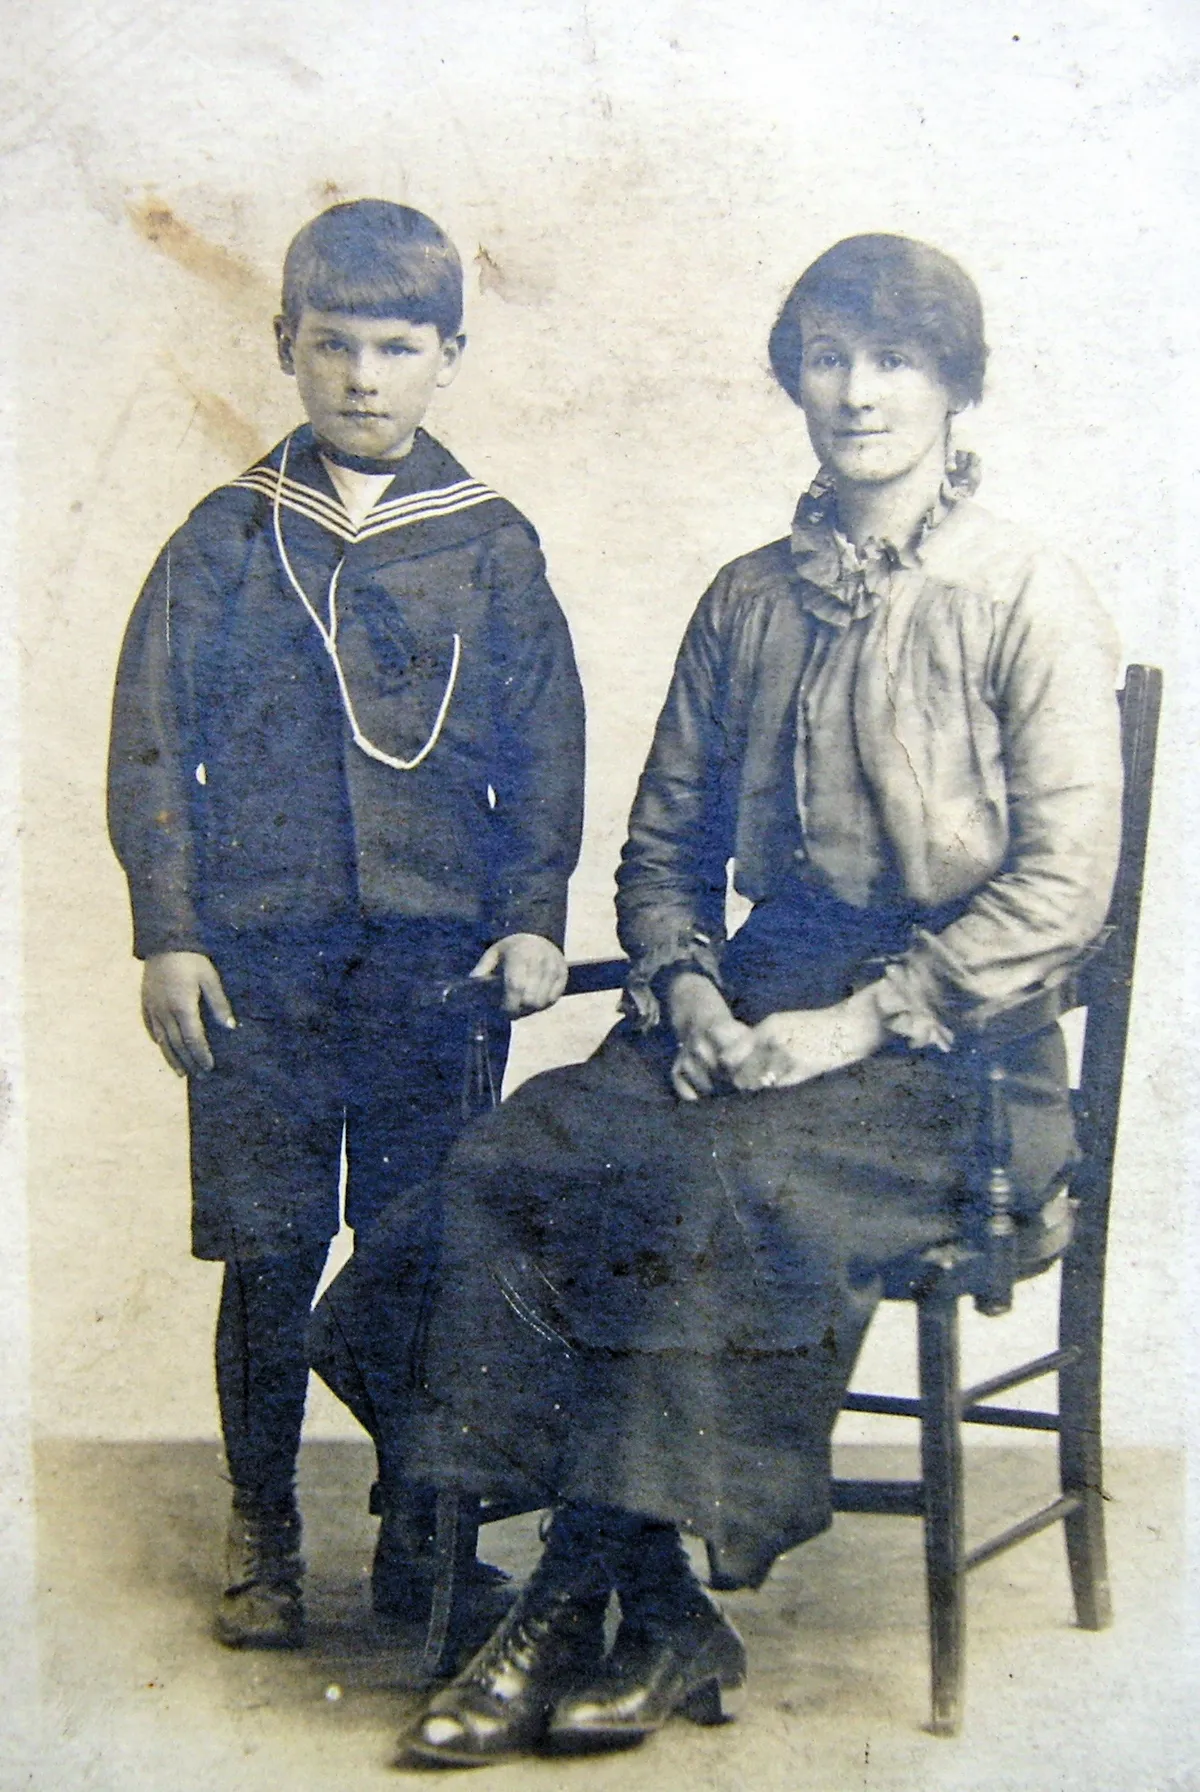 Black and white photograph of a woman sitting on a chair and a little boy in a sailor suit